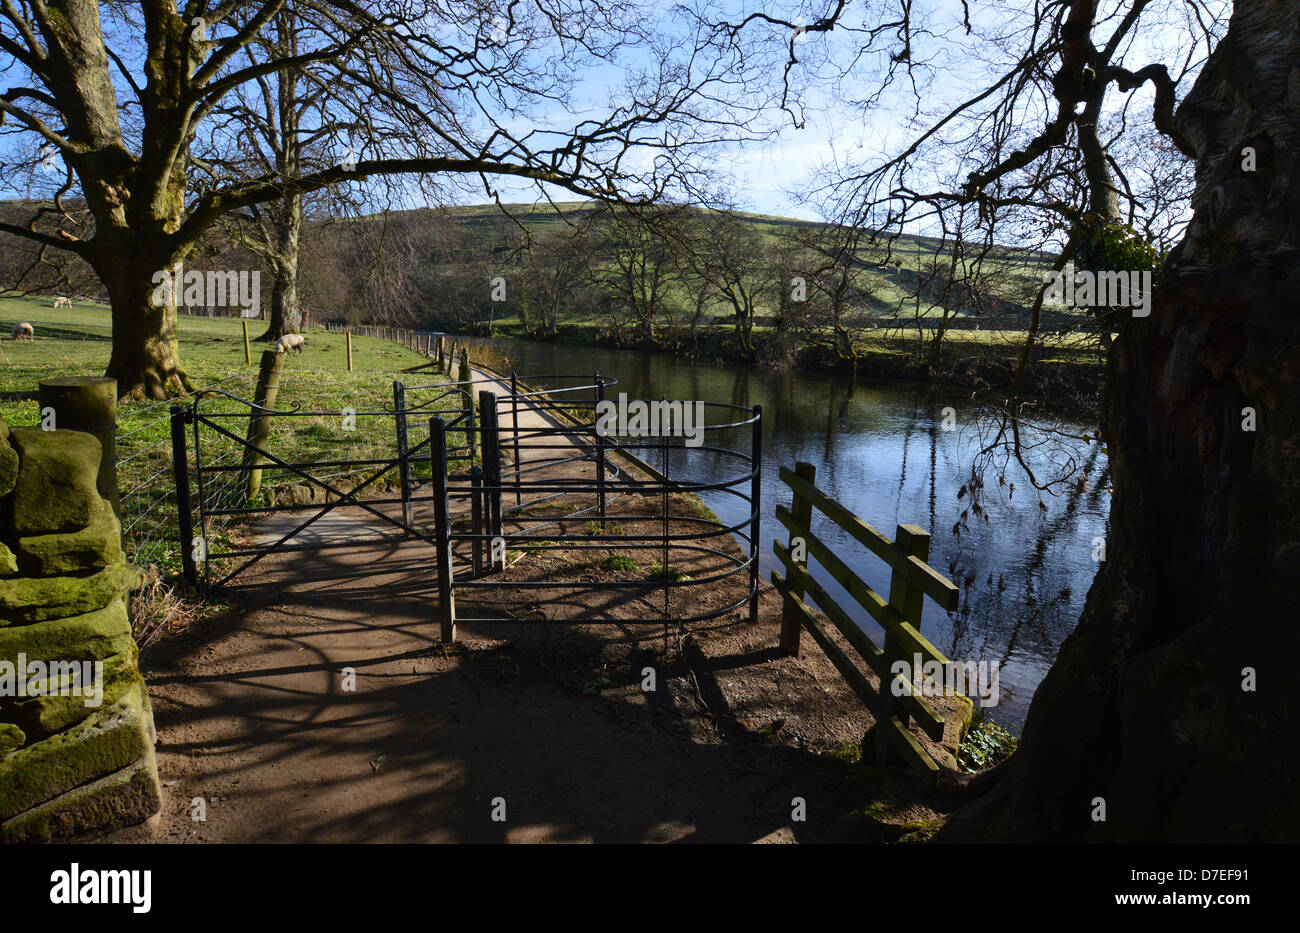 Metal Kissing Gate by the River Wharfe near Burnsall on the Dales Way Long Distance Footpath Wharfedale Yorkshire. Stock Photo